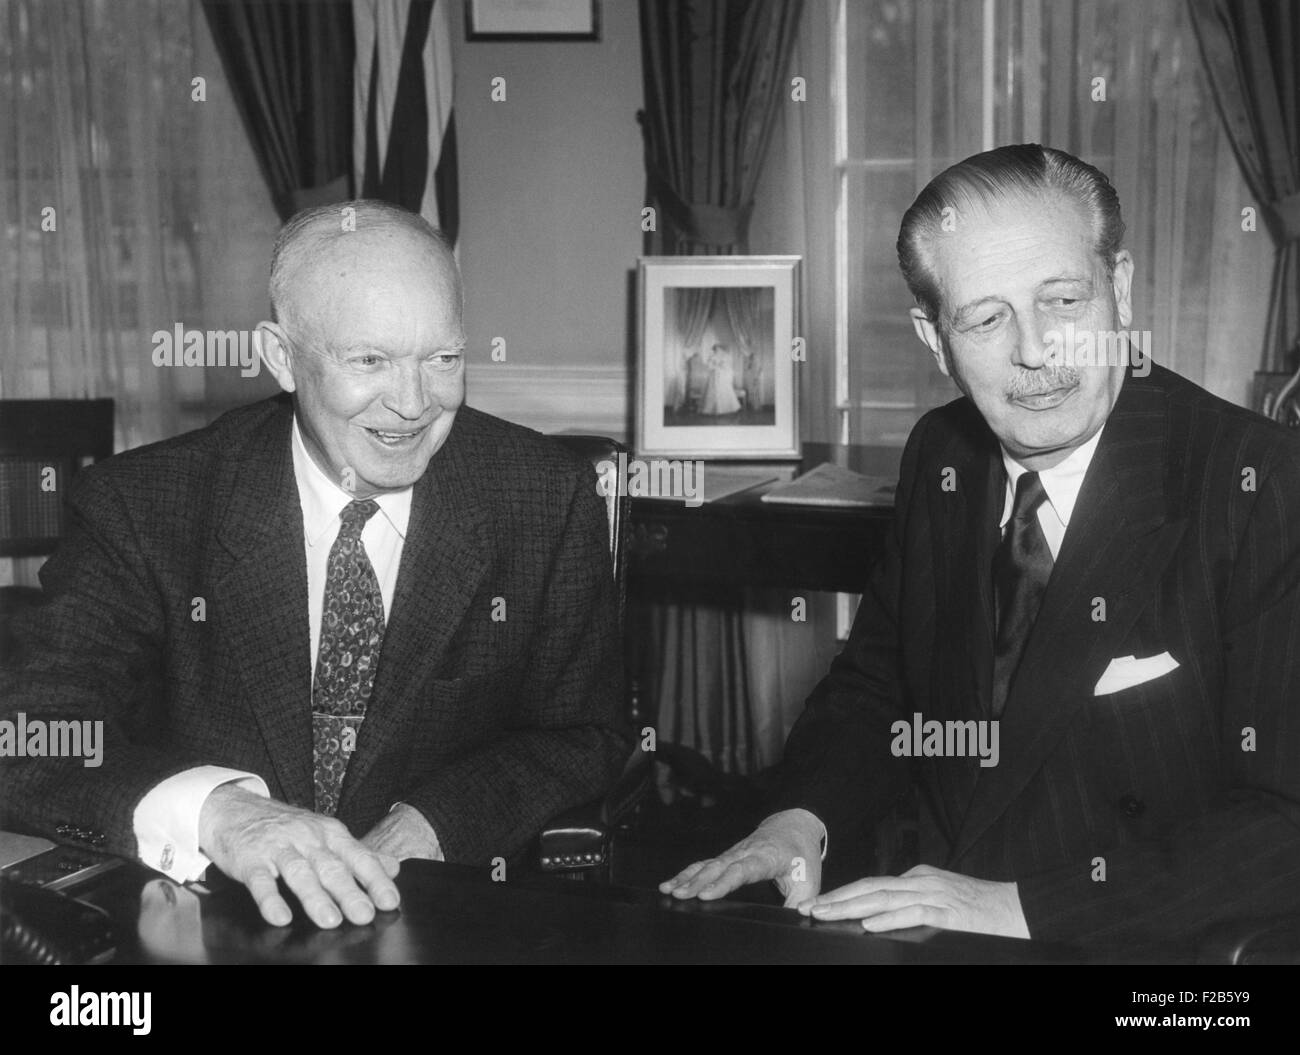 President Eisenhower with British Prime Minister Harold Macmillan in the Oval Office. March 23, 1959. - (BSLOC 2014 16 223) Stock Photo